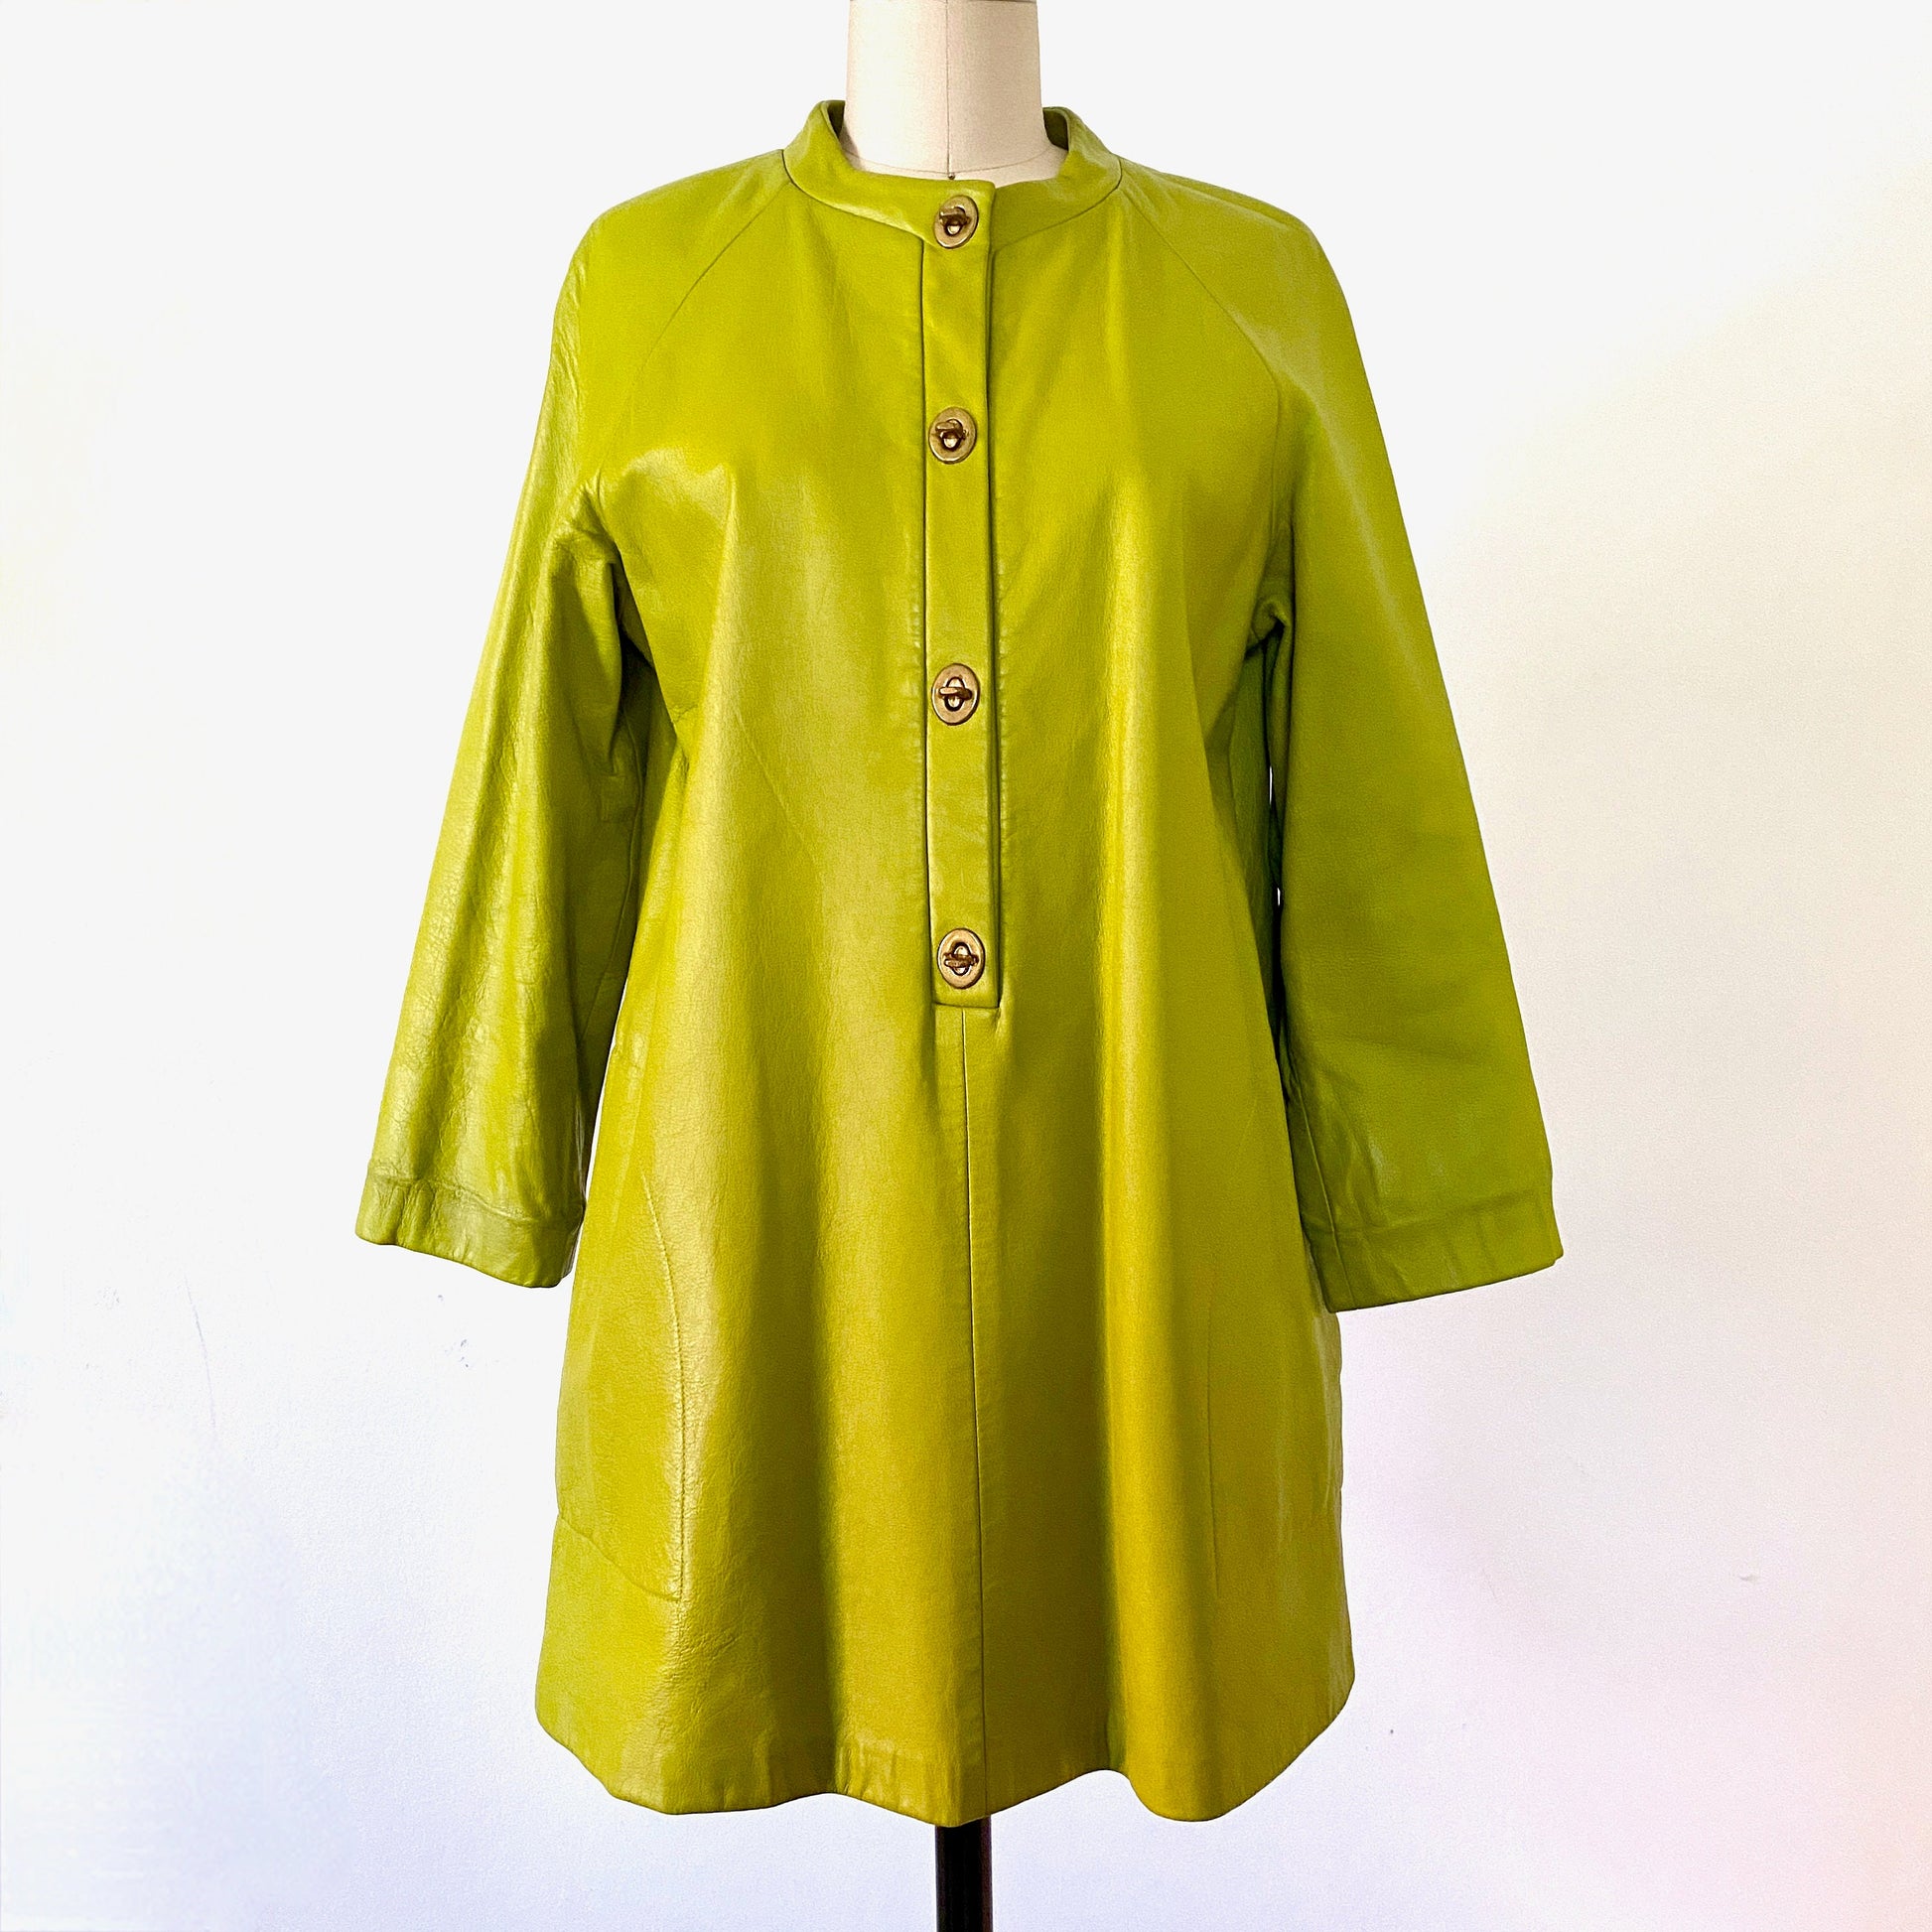 Green Belted Swing Coat - Love ur Look Clothing and Vintage